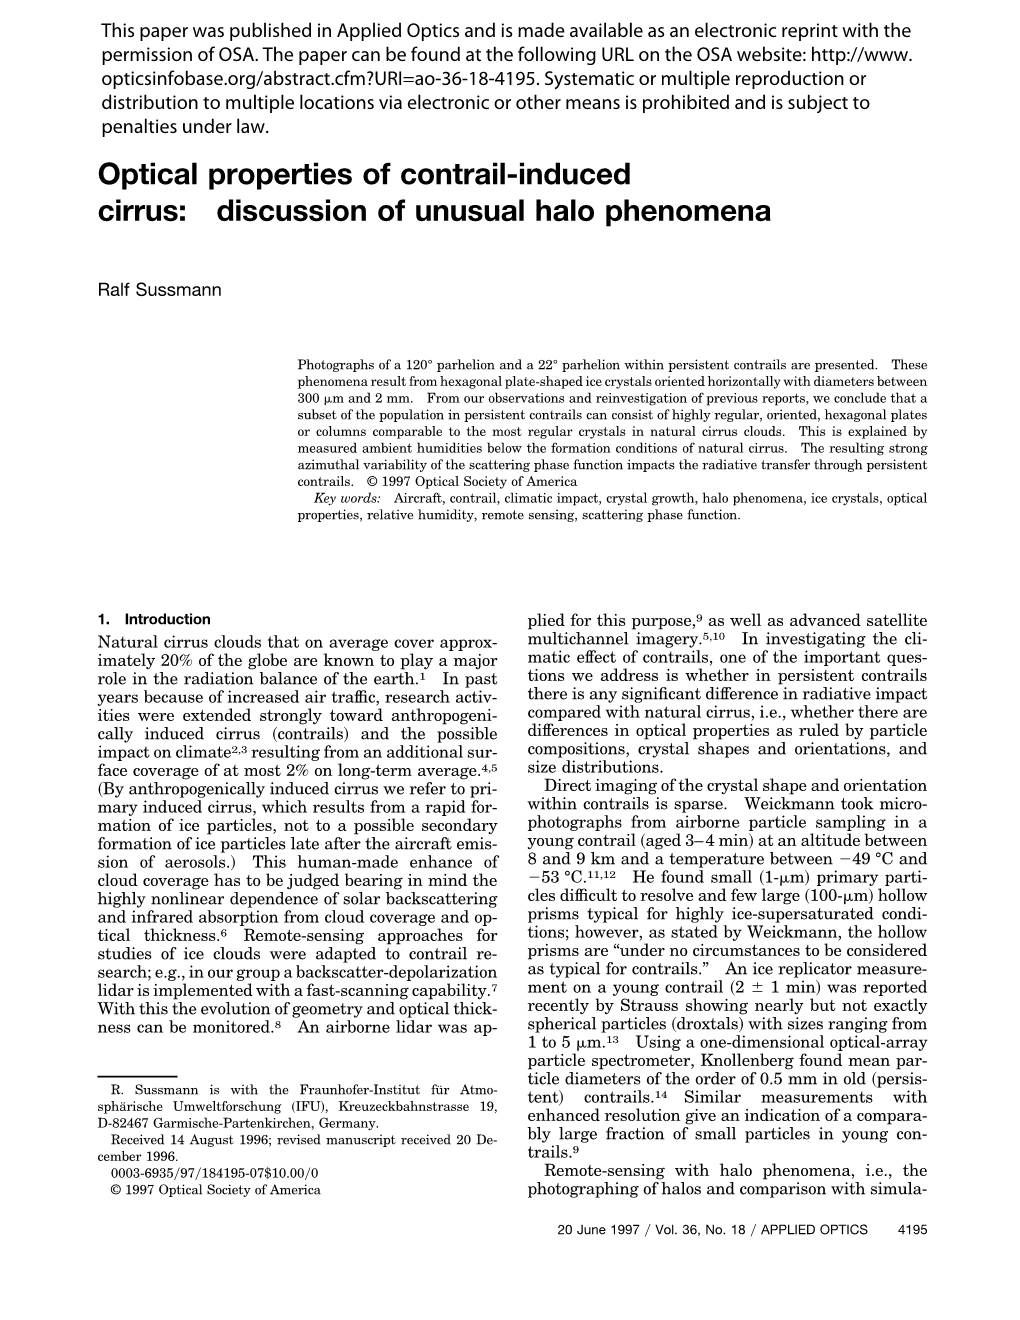 Optical Properties of Contrail-Induced Cirrus: Discussion of Unusual Halo Phenomena